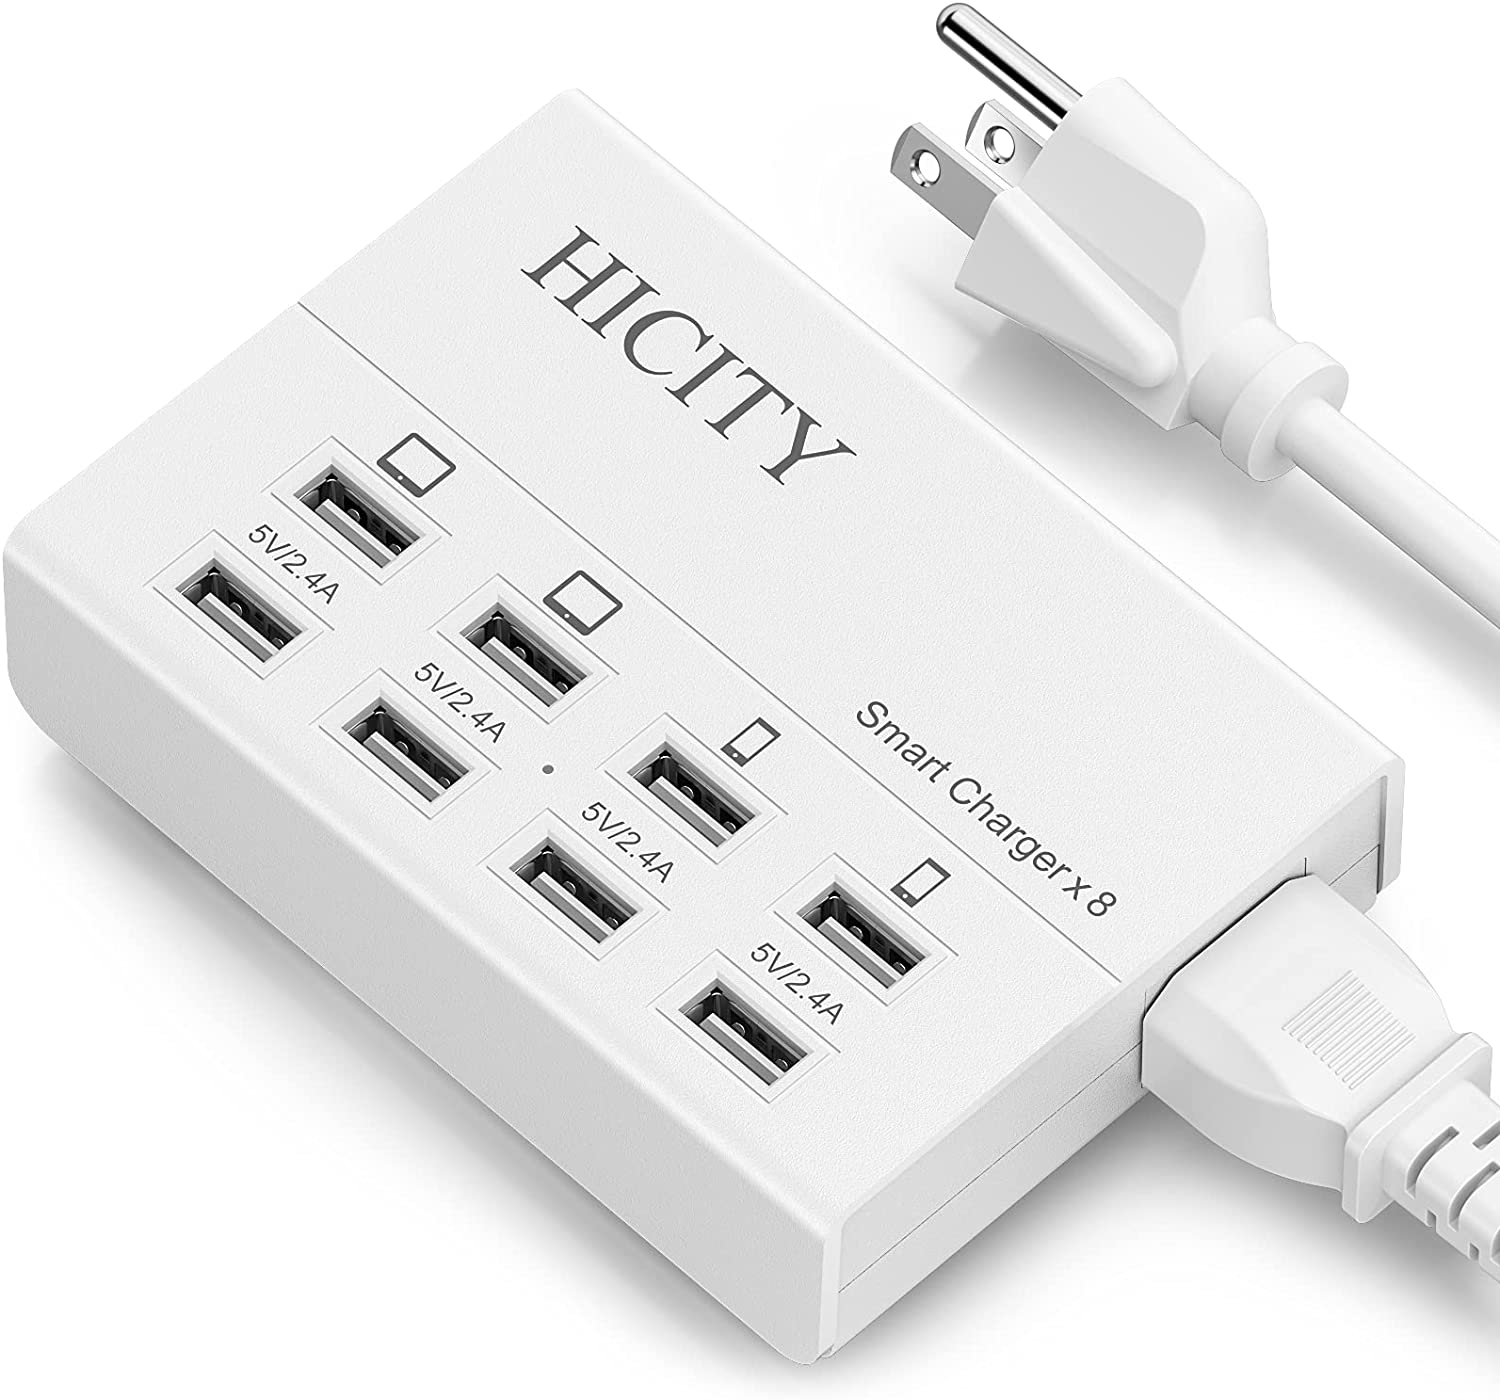 USB Charger, HICITY 50W 10A 8-Port Family-Sized Desktop USB Charging Station,  ISmart Multi USB Ports Charger Hub for Multiple Devices (5ft Detachable Cord,  White)